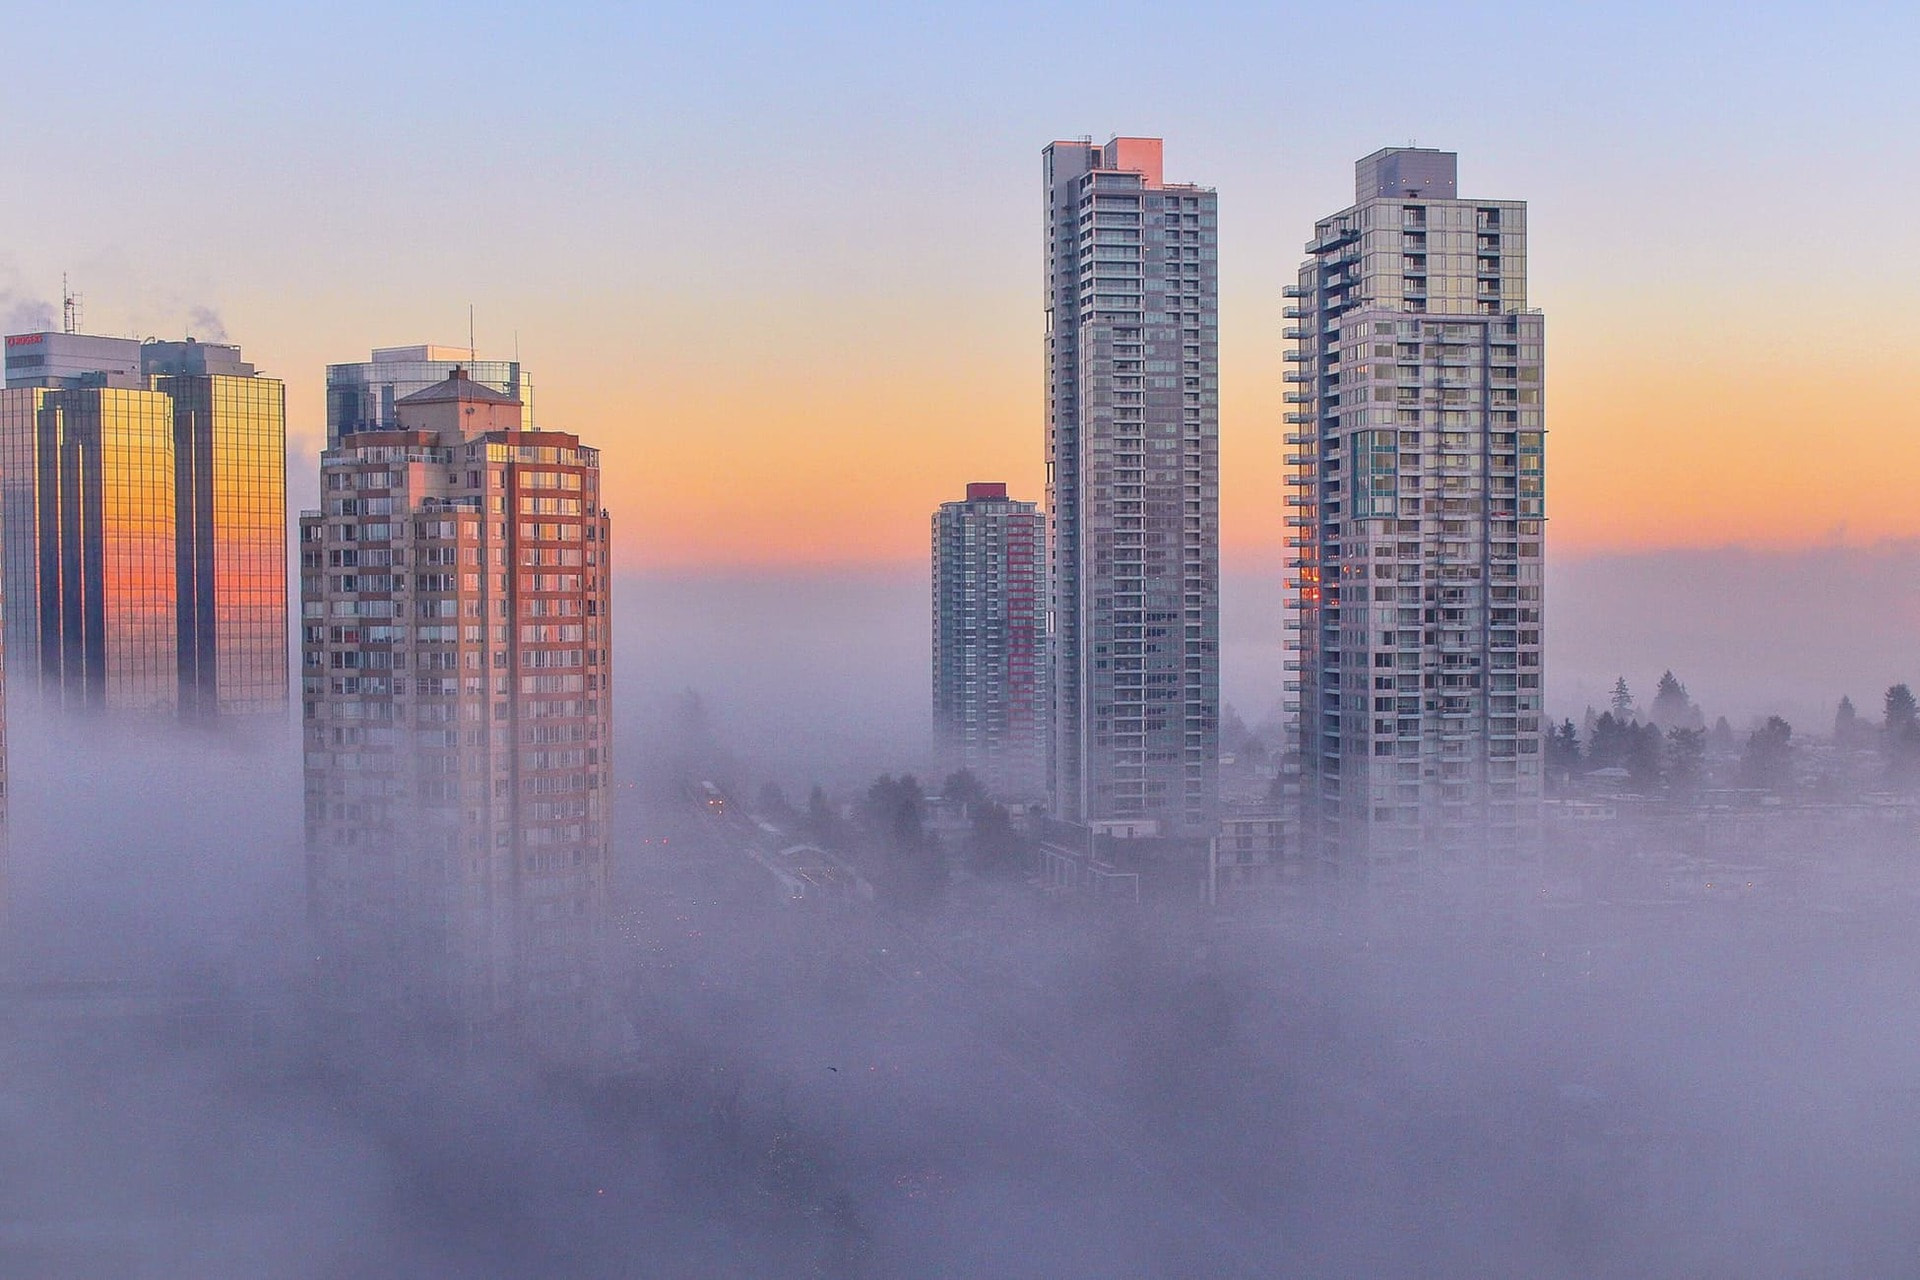 Skyscrapers reach above the fog in a Canadian city